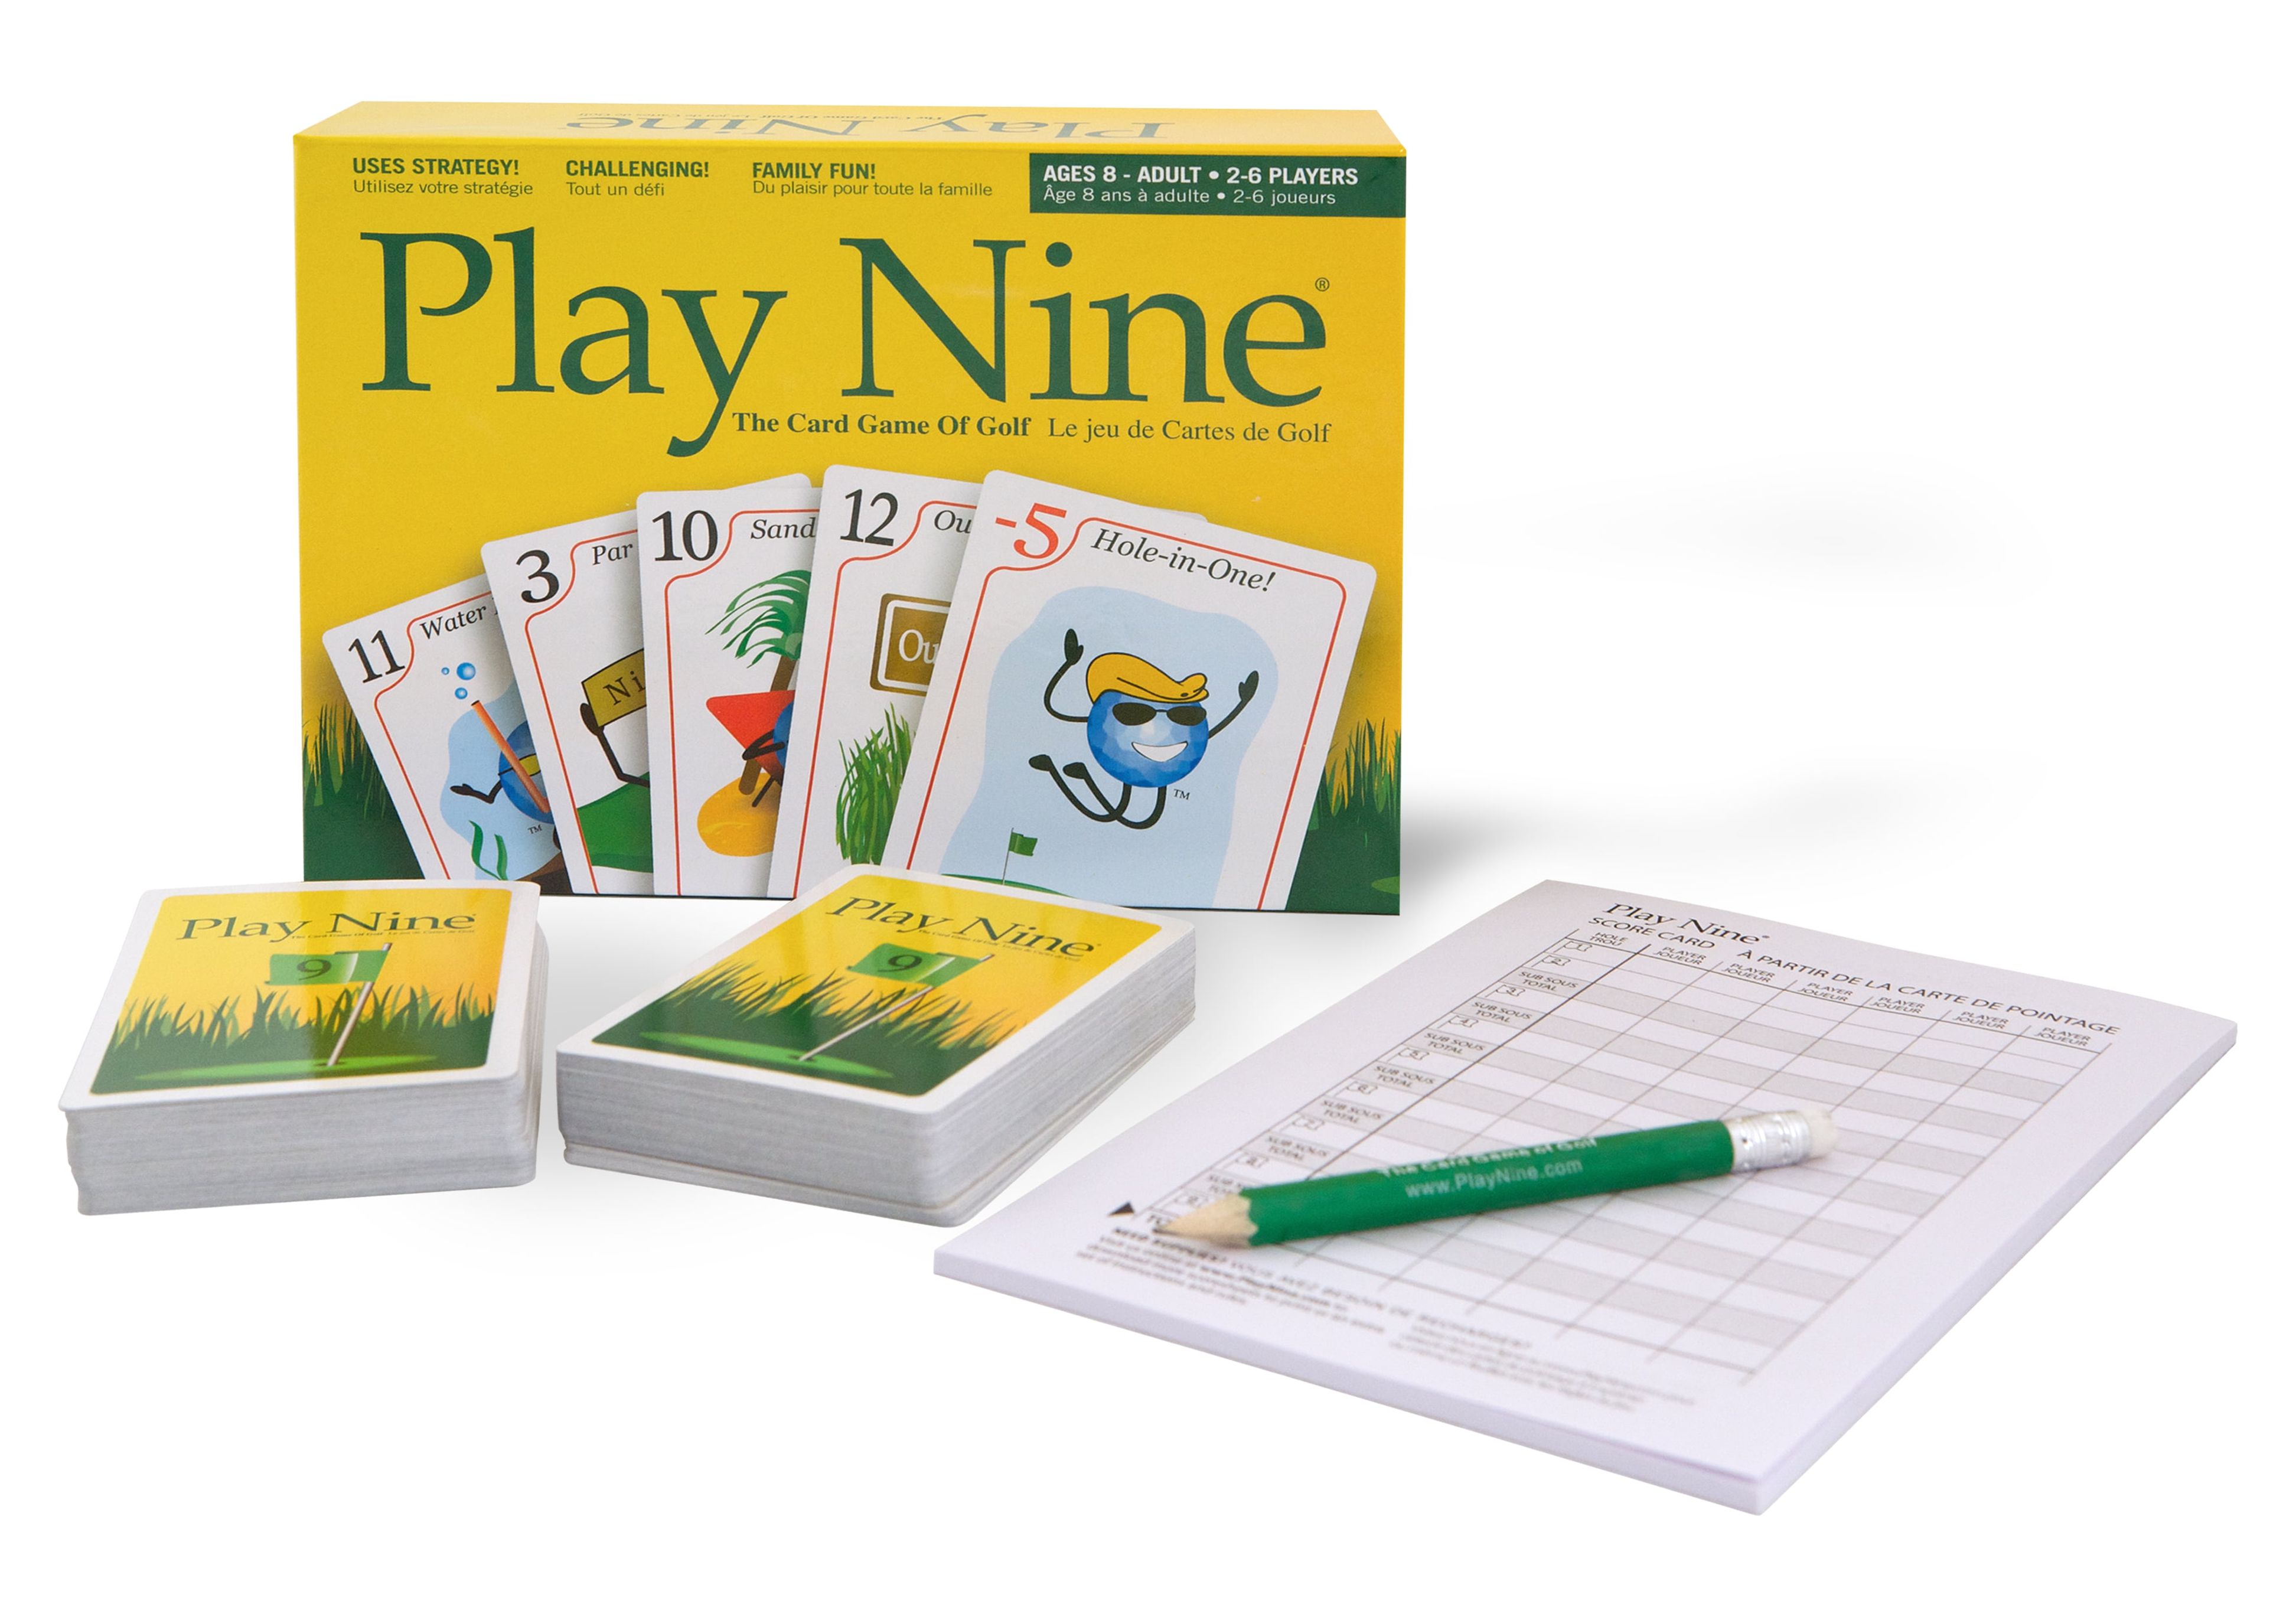 Play Nine The Card Game of Golf New in Box Sealed Great family fun - image 5 of 8